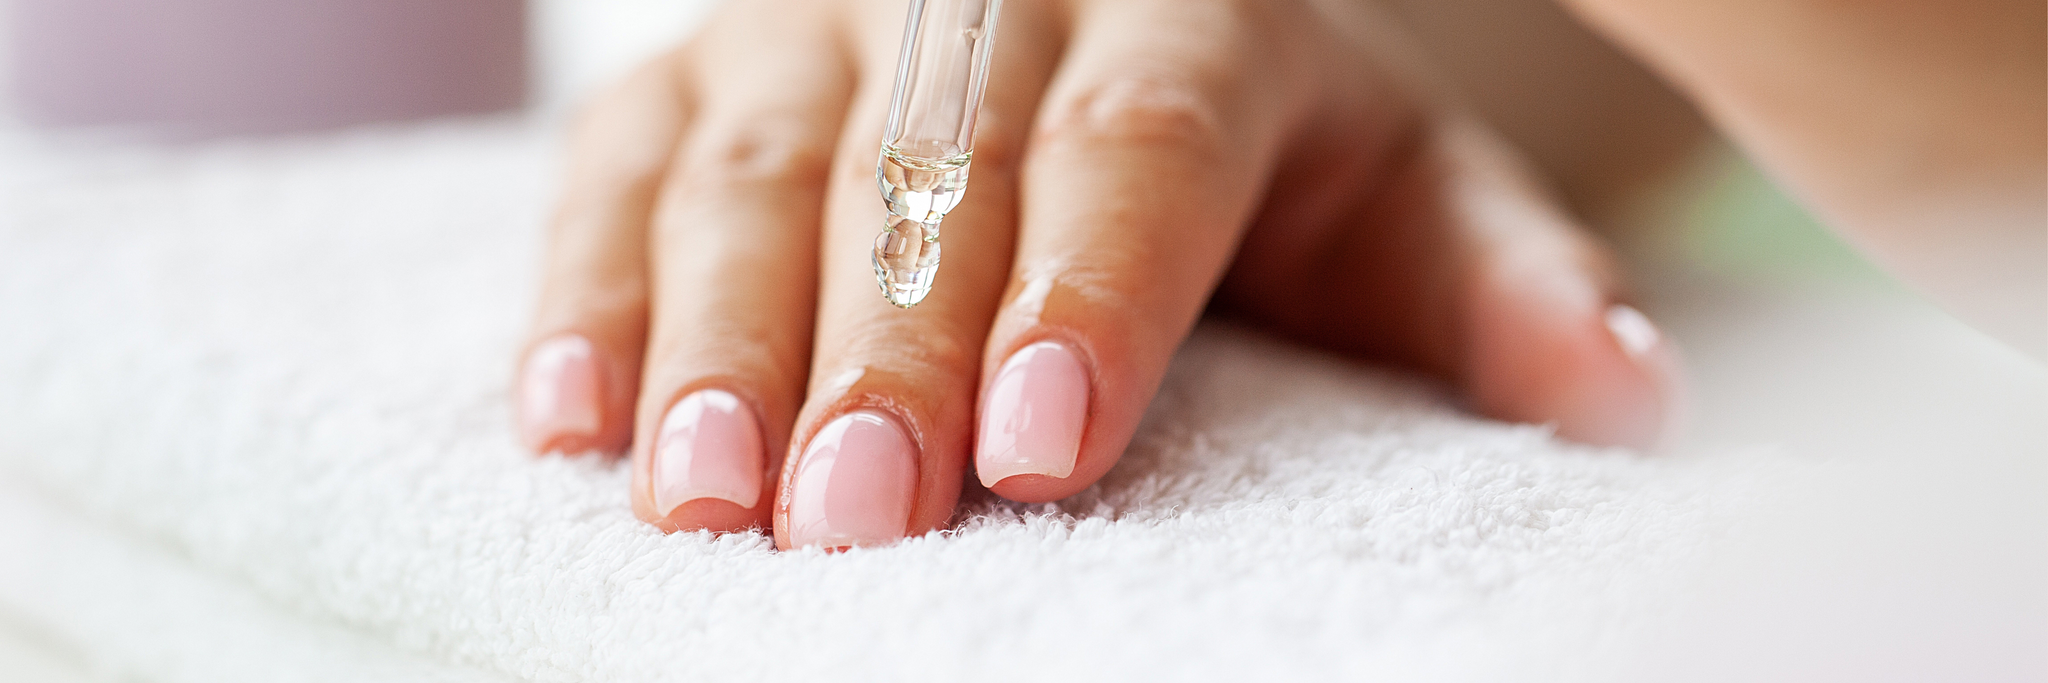 The Nail Beauty & Co. Blog - Cuticle Care Tips